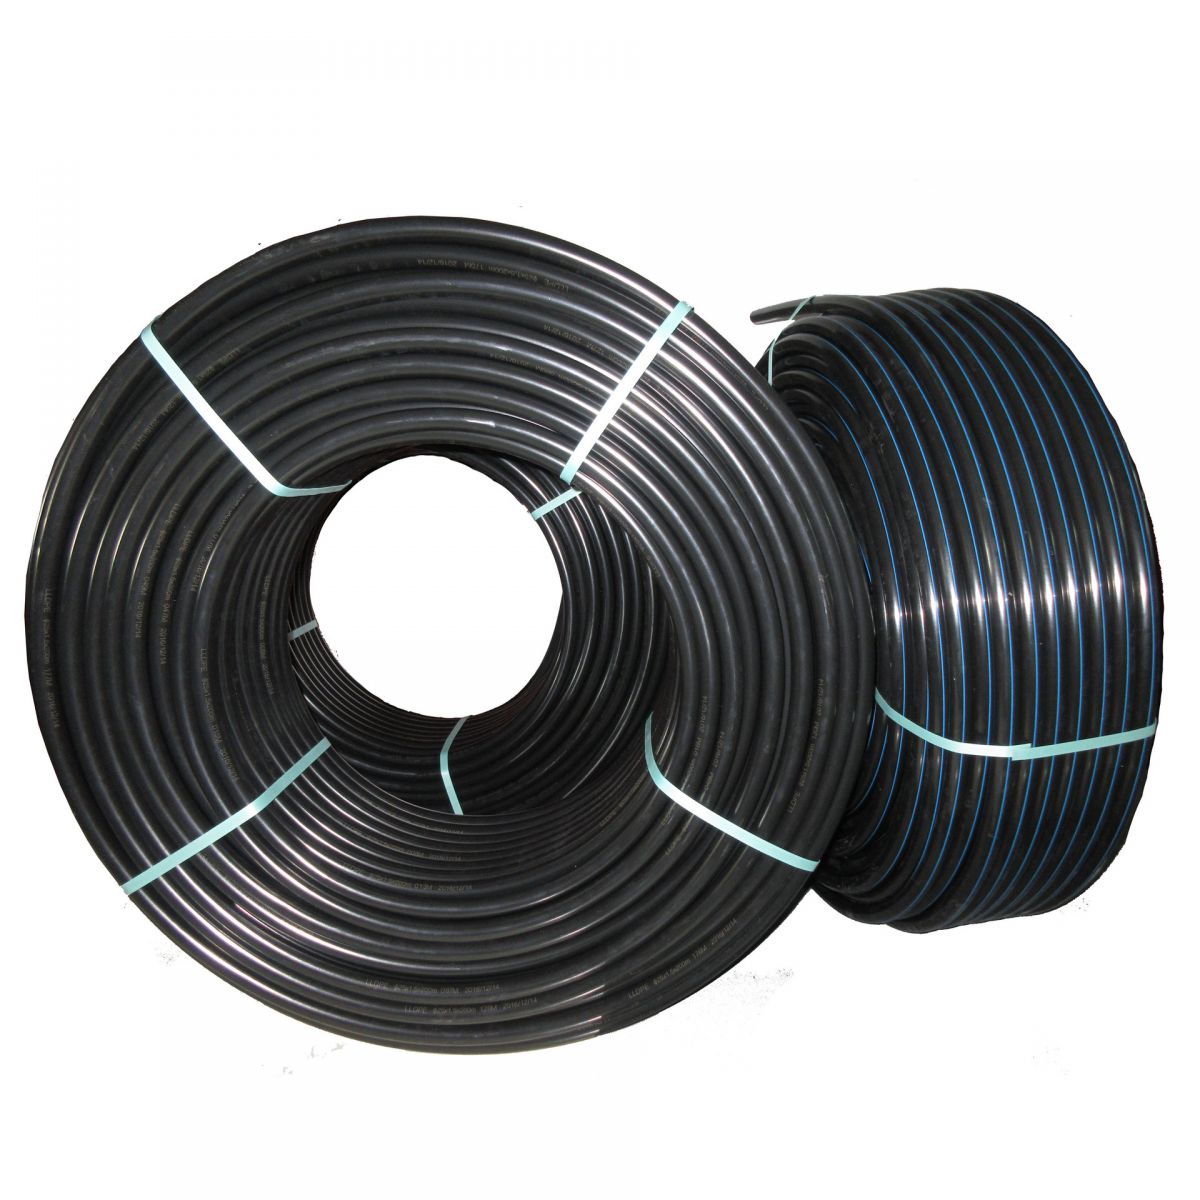 16mm LDPE Drip Irrigation Pipe, Thickness 1.0-1.6mm, 0.4-1.0MPa